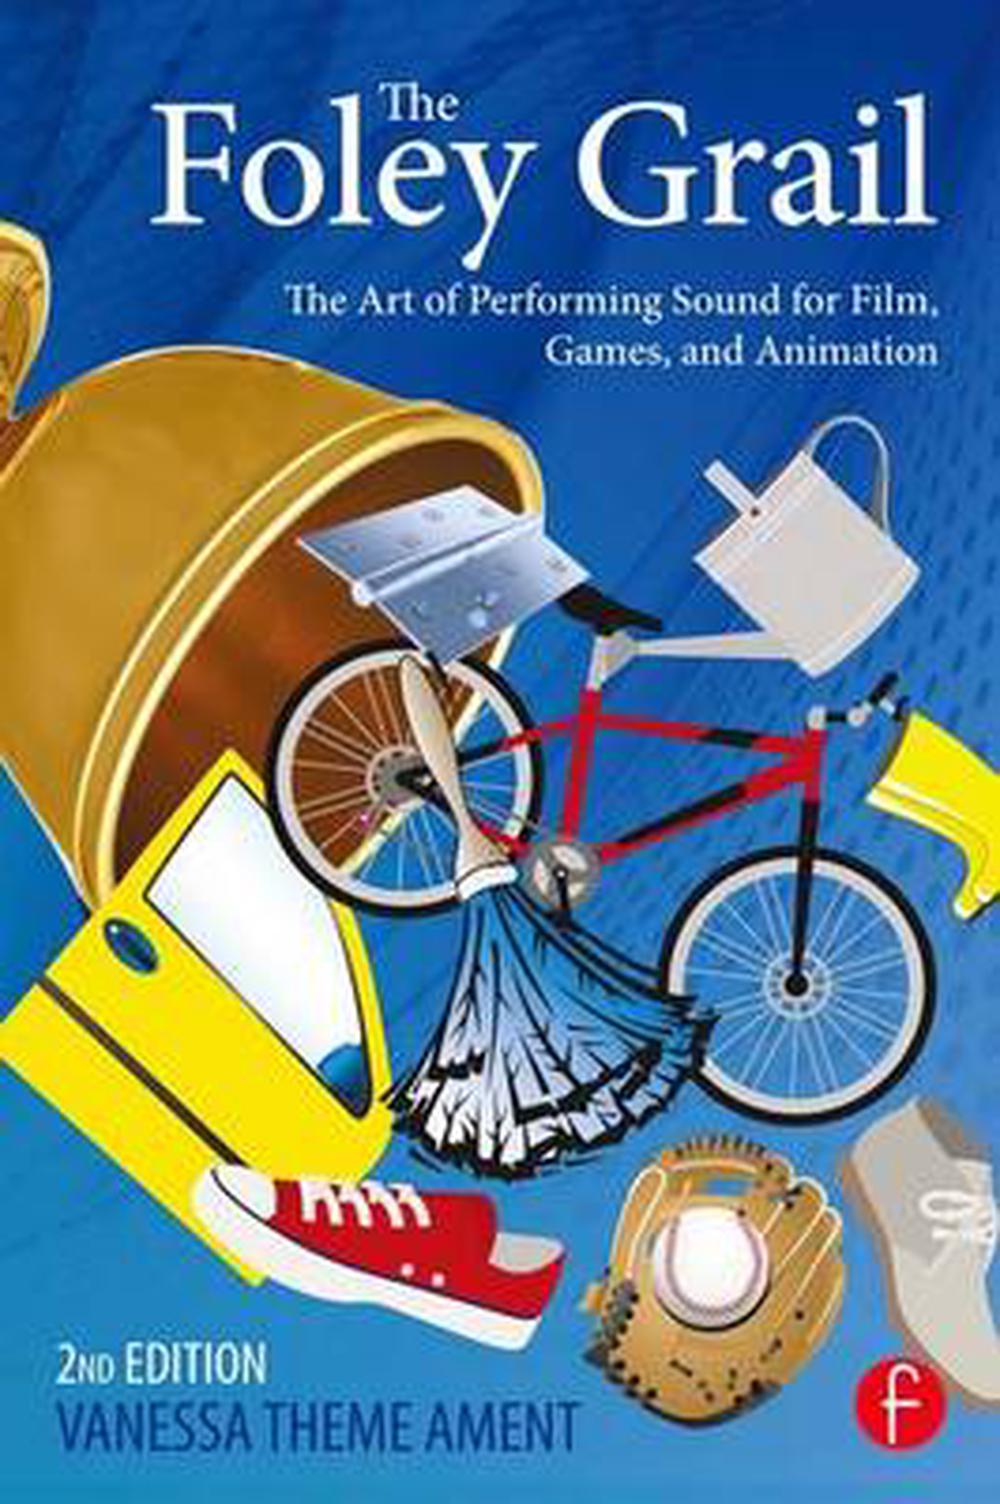 The Foley Grail The Art of Performing Sound for Film, Games, and